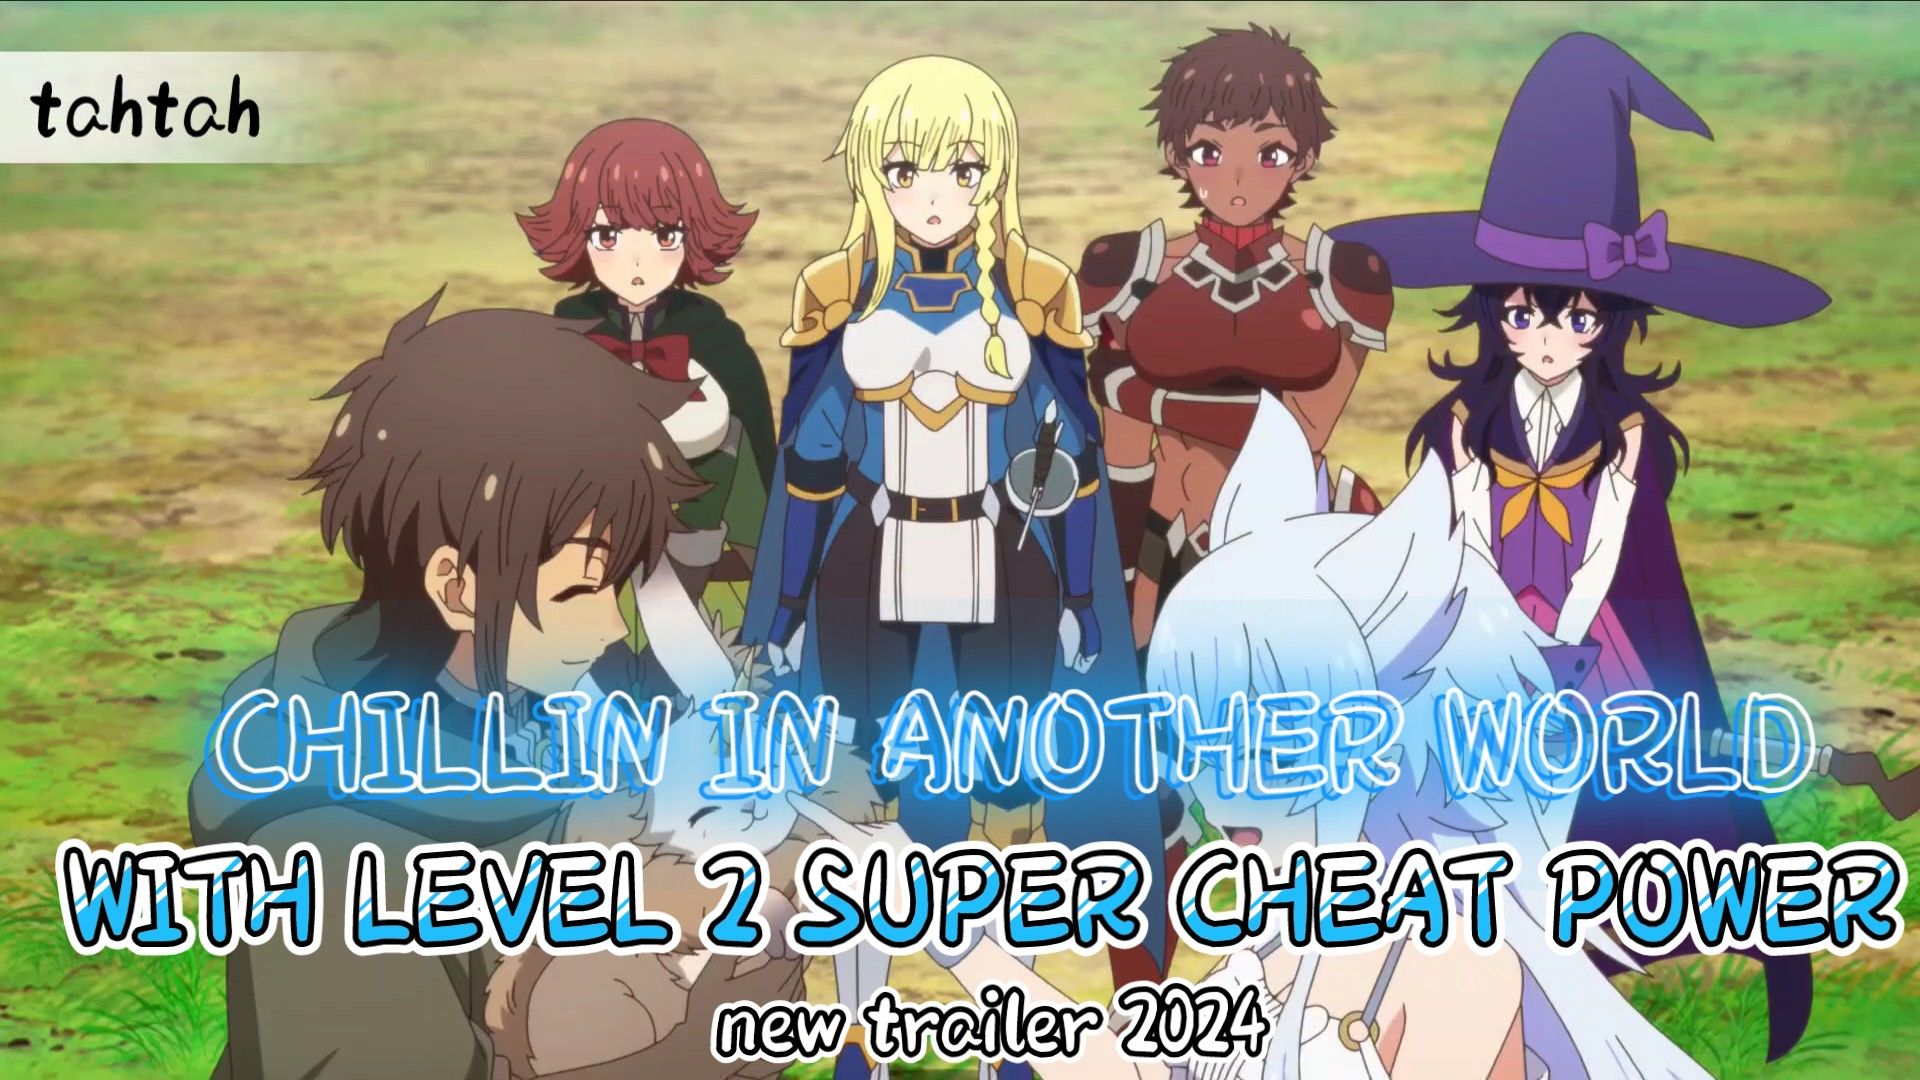 NEWS: Chillin' in Another World with Level 2 Super Cheat Powers